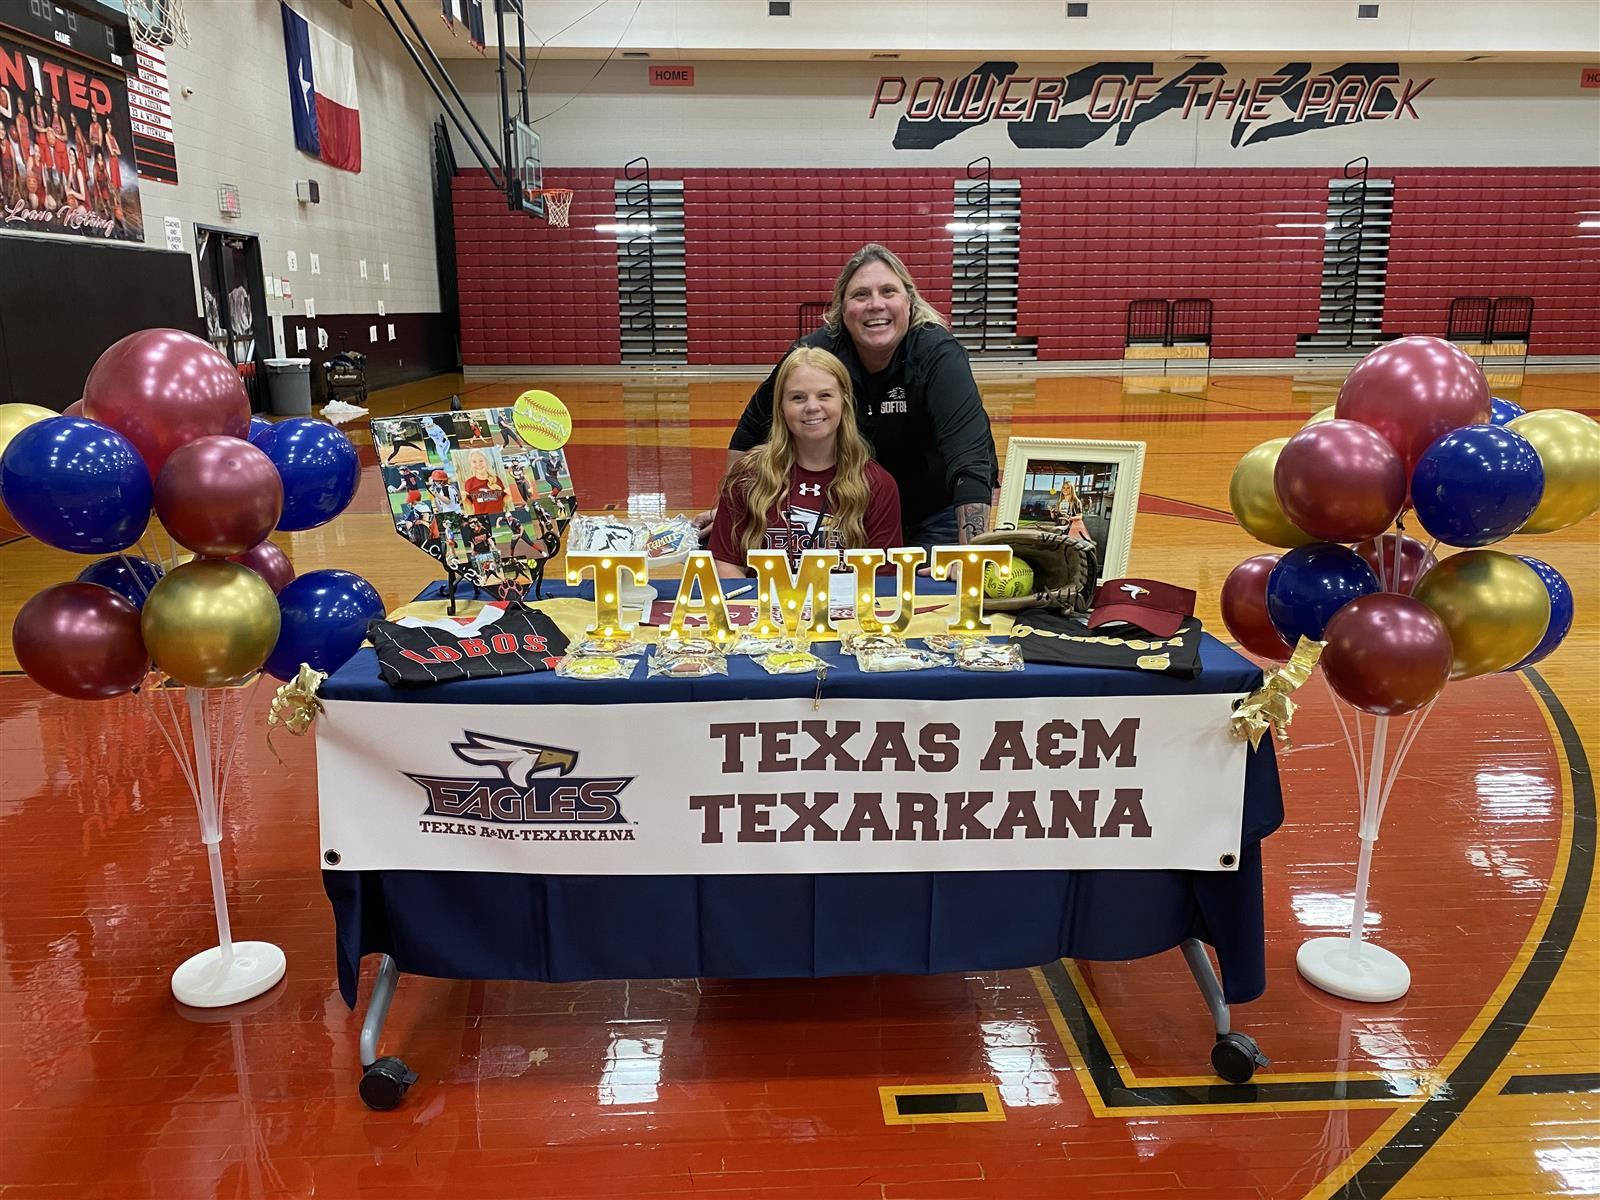 Langham Creek senior Lauren Cox, seated, signed a letter of intent to play softball at Texas A&M University-Texarkana.